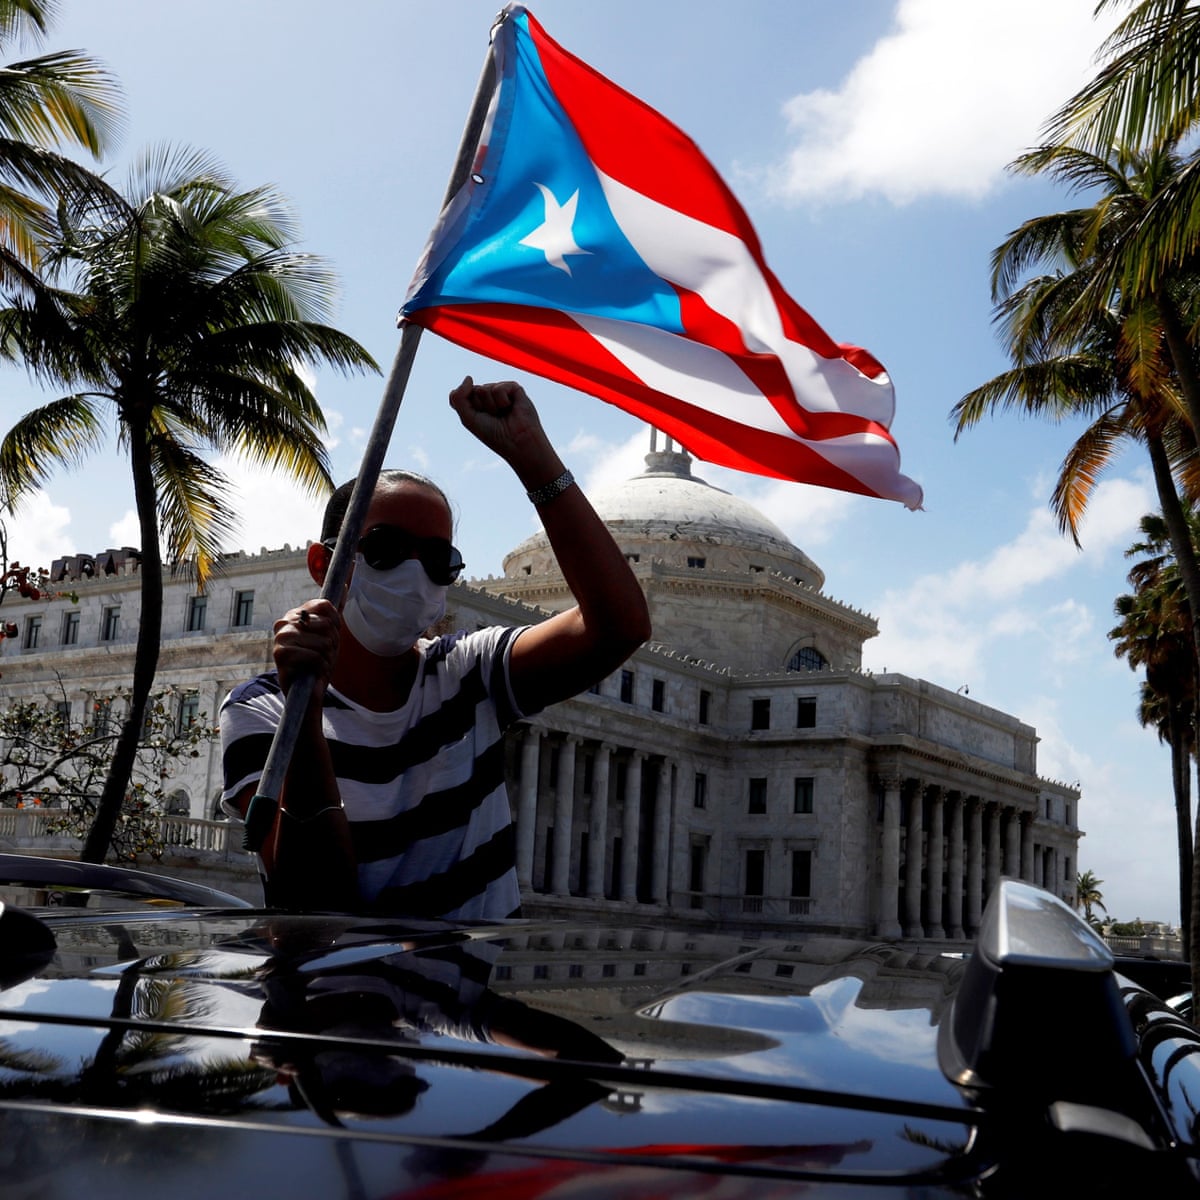 New stars on the American flag? Fresh hope as Puerto Rico and DC